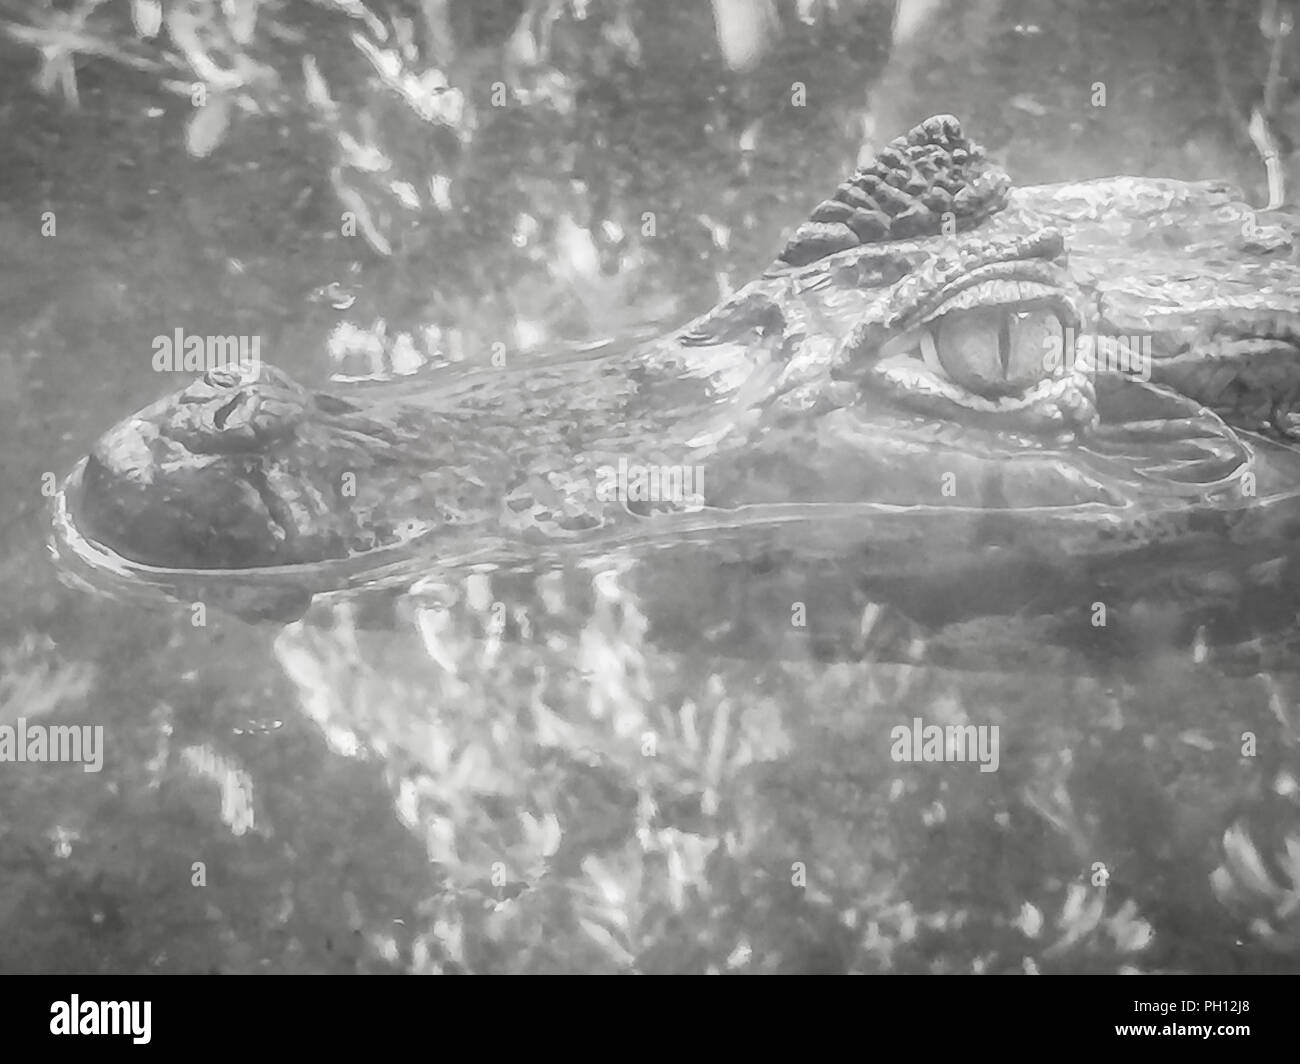 Close up to big and frightening eye of a Caiman (Caimaninae) crocodile staying in still water Stock Photo